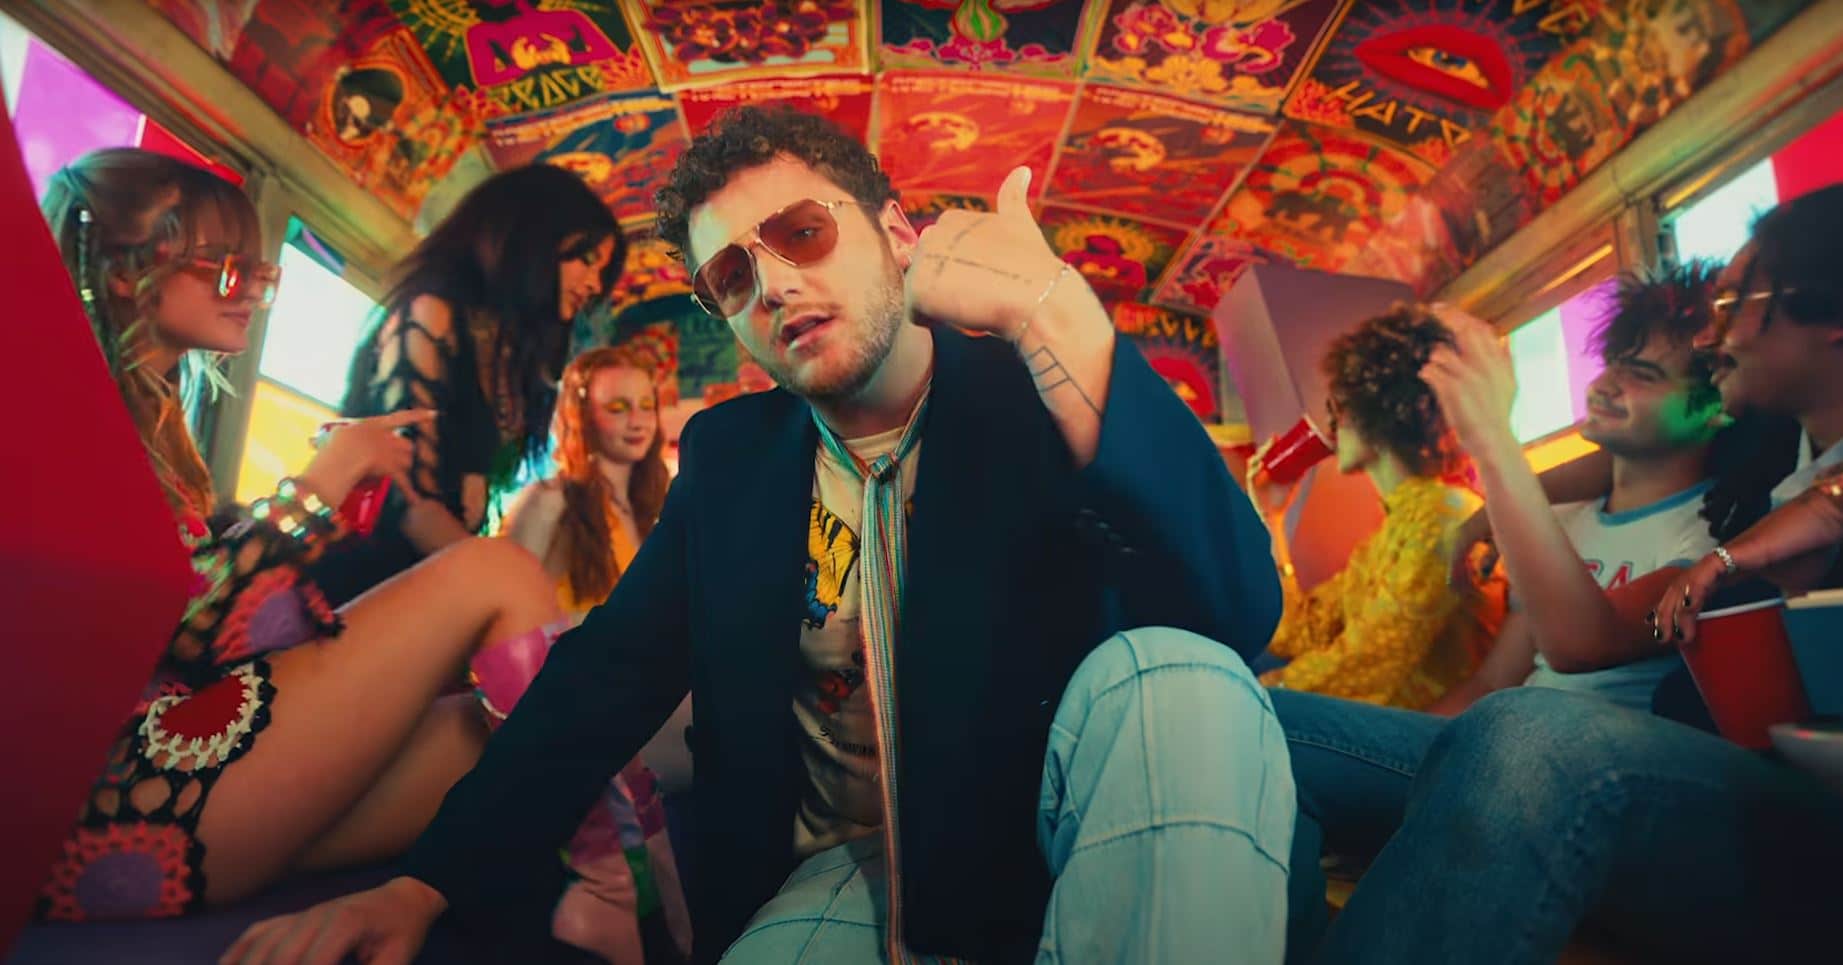 Bazzi Packs The Good Vibes In Uplifting 'I Like That' Video / News ...